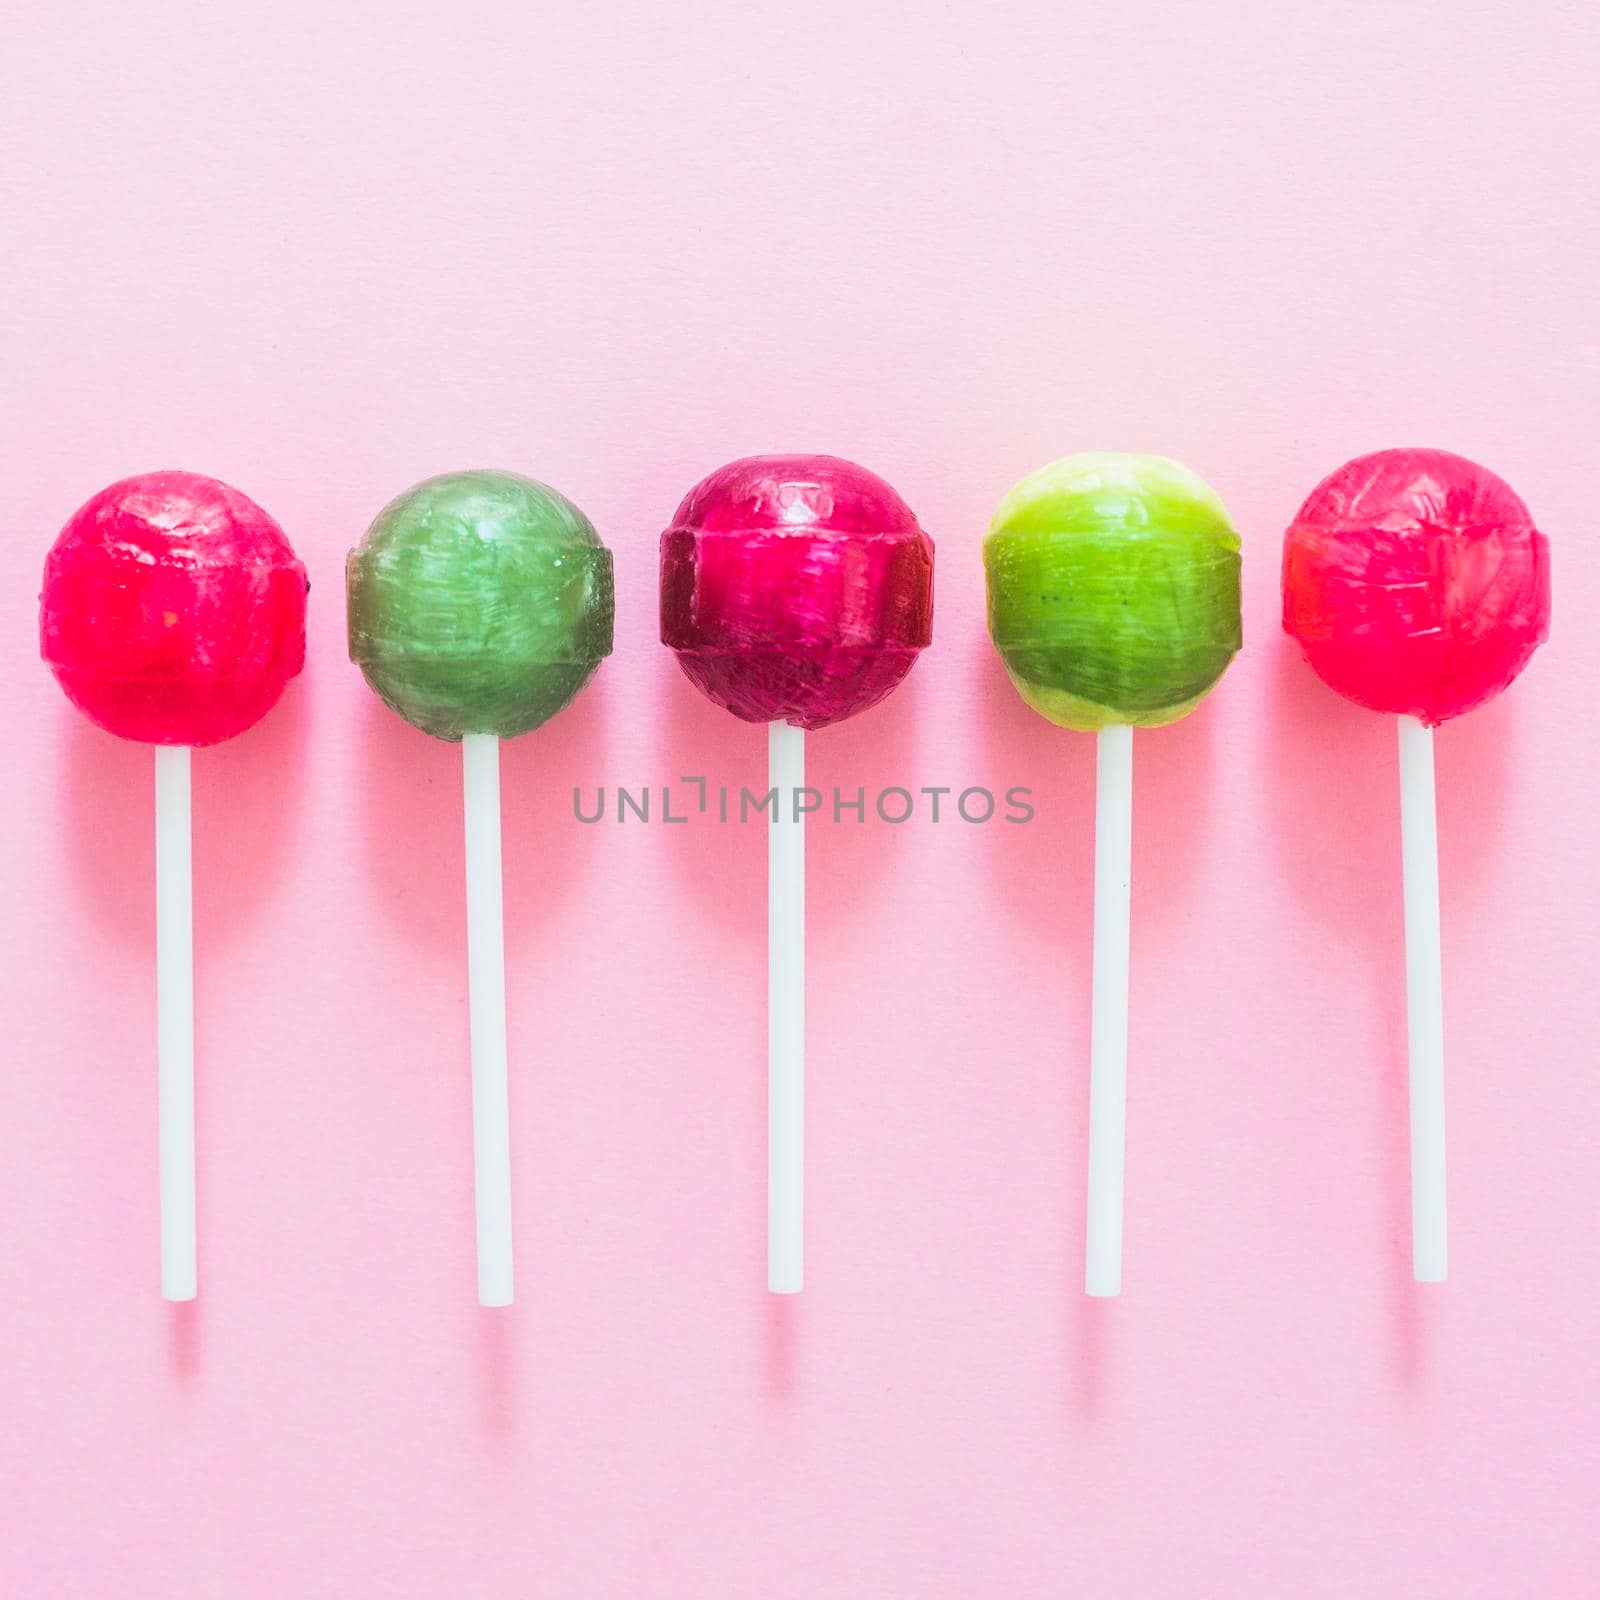 five colorful lollipops. High quality photo by Zahard